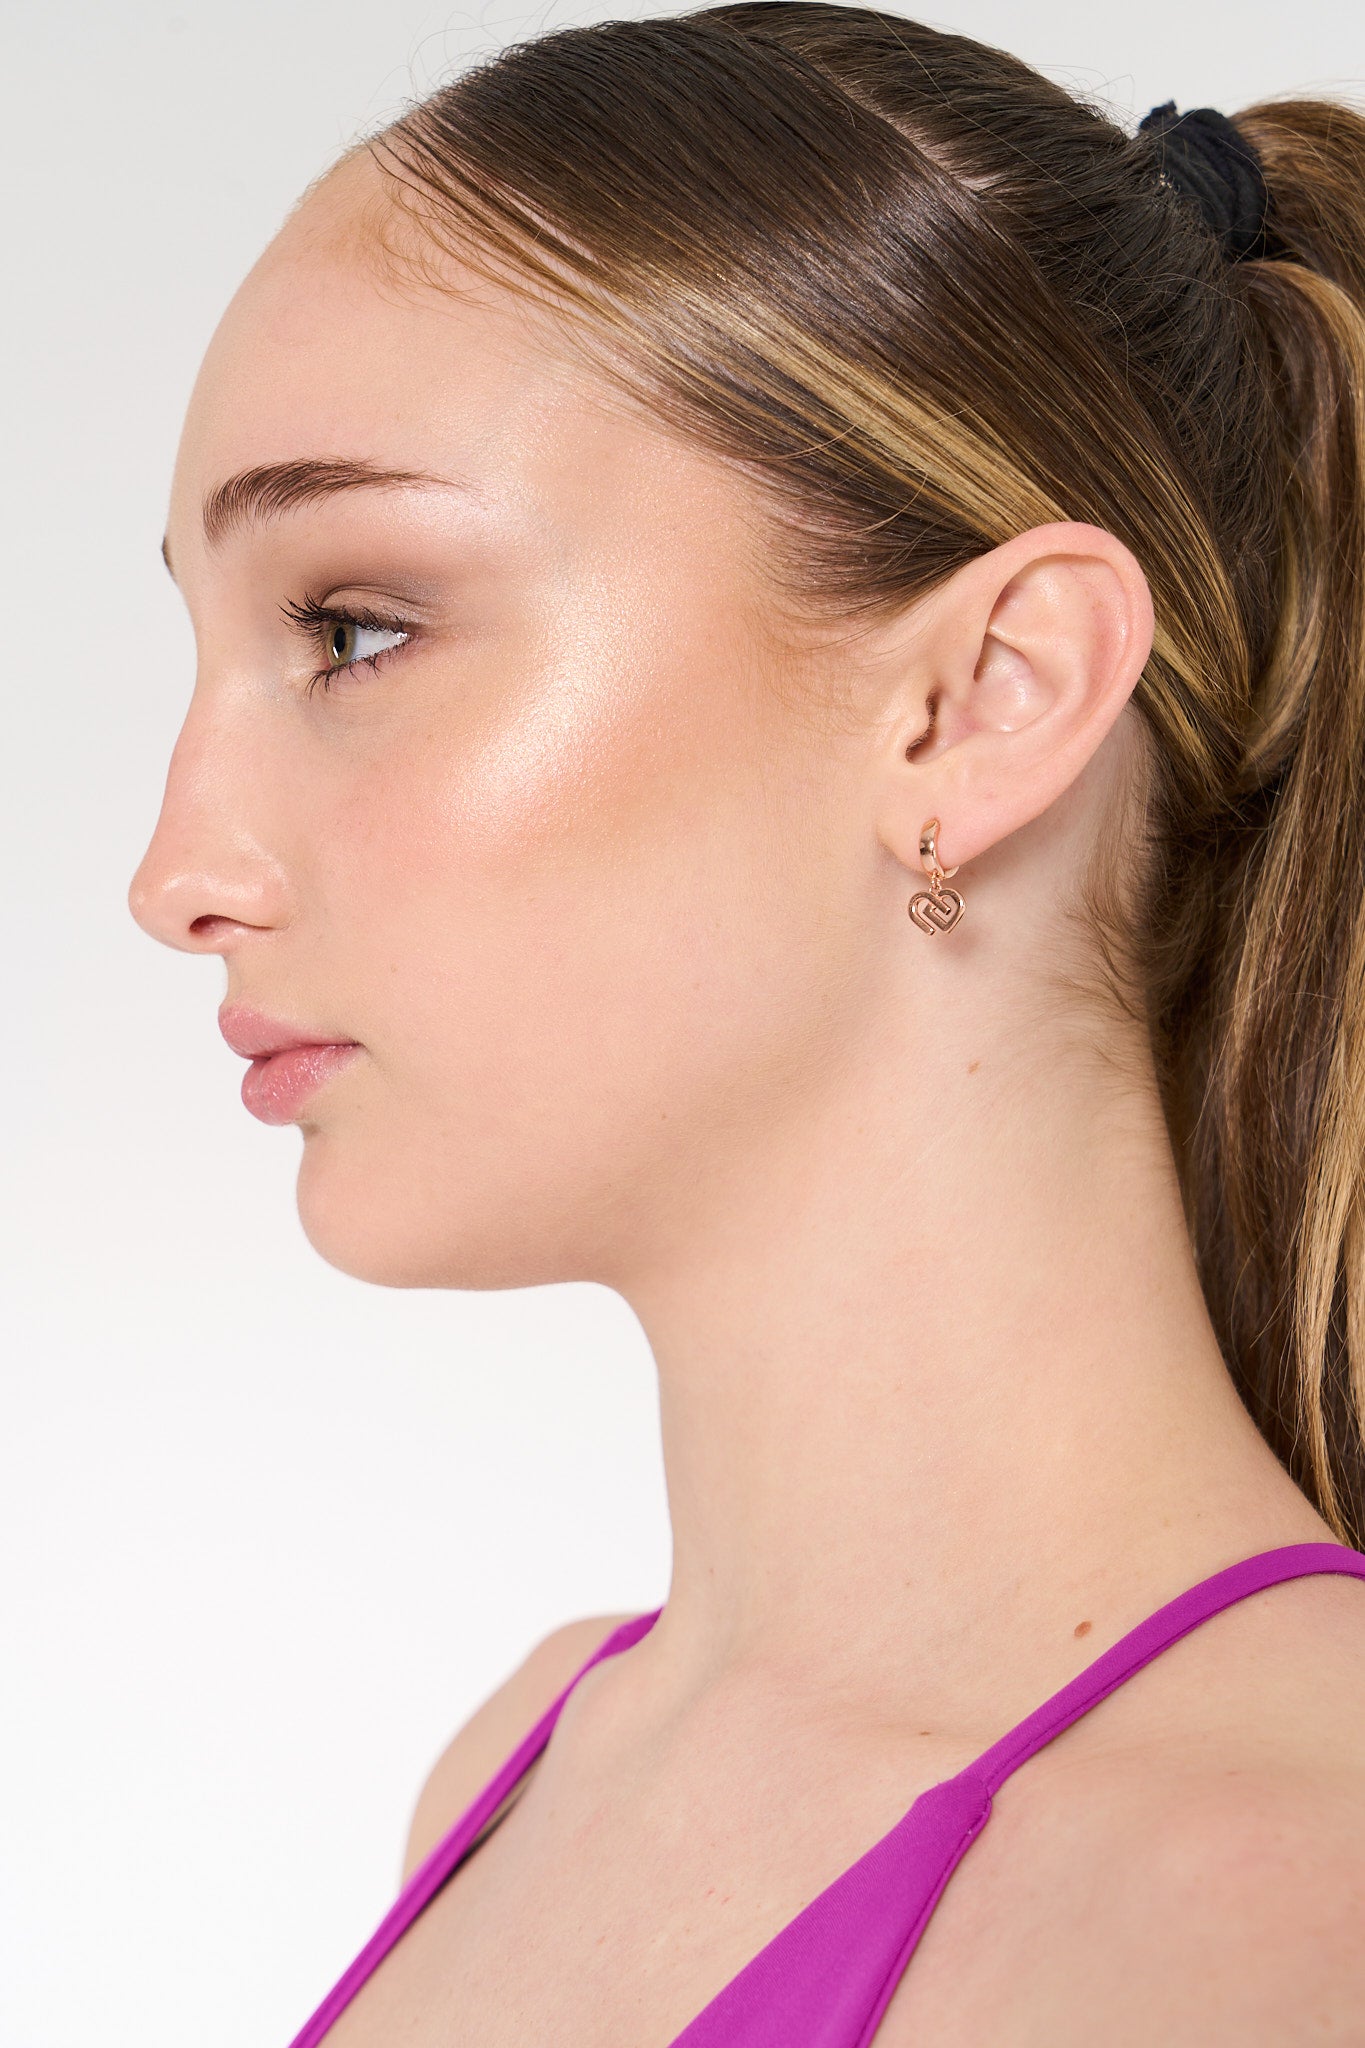 young woman wearing hypoallergenic rose gold earrings